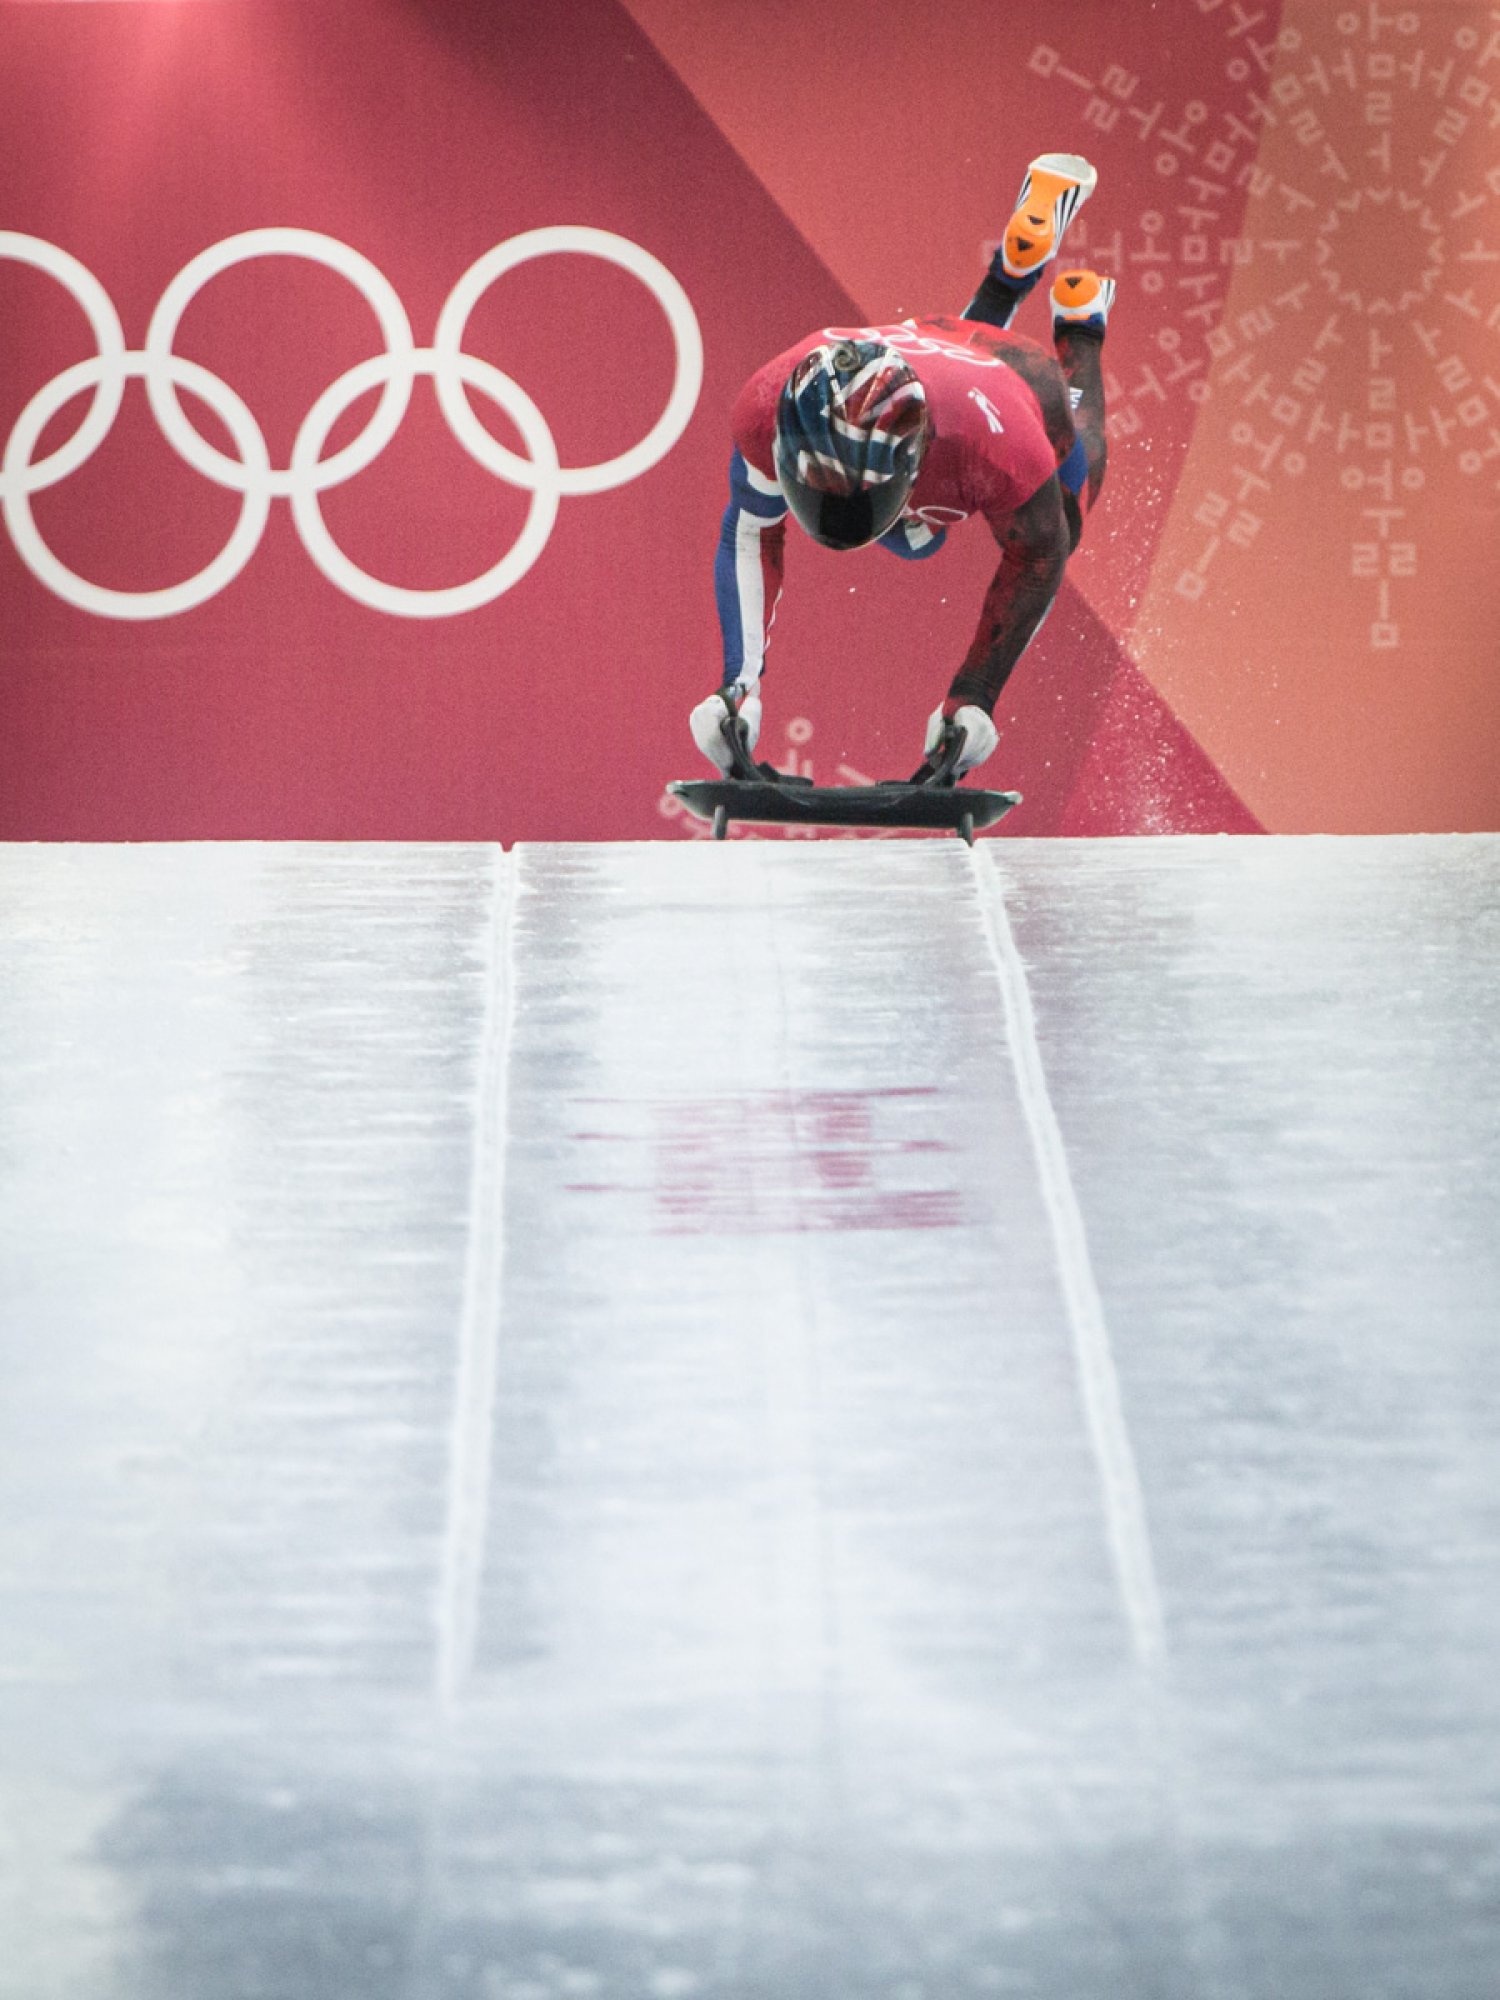 Skeleton (Sport): An athlete pushes off at the start of the singles event at the 2018 PyeongChang Winter Olympic Games. 1500x2000 HD Wallpaper.